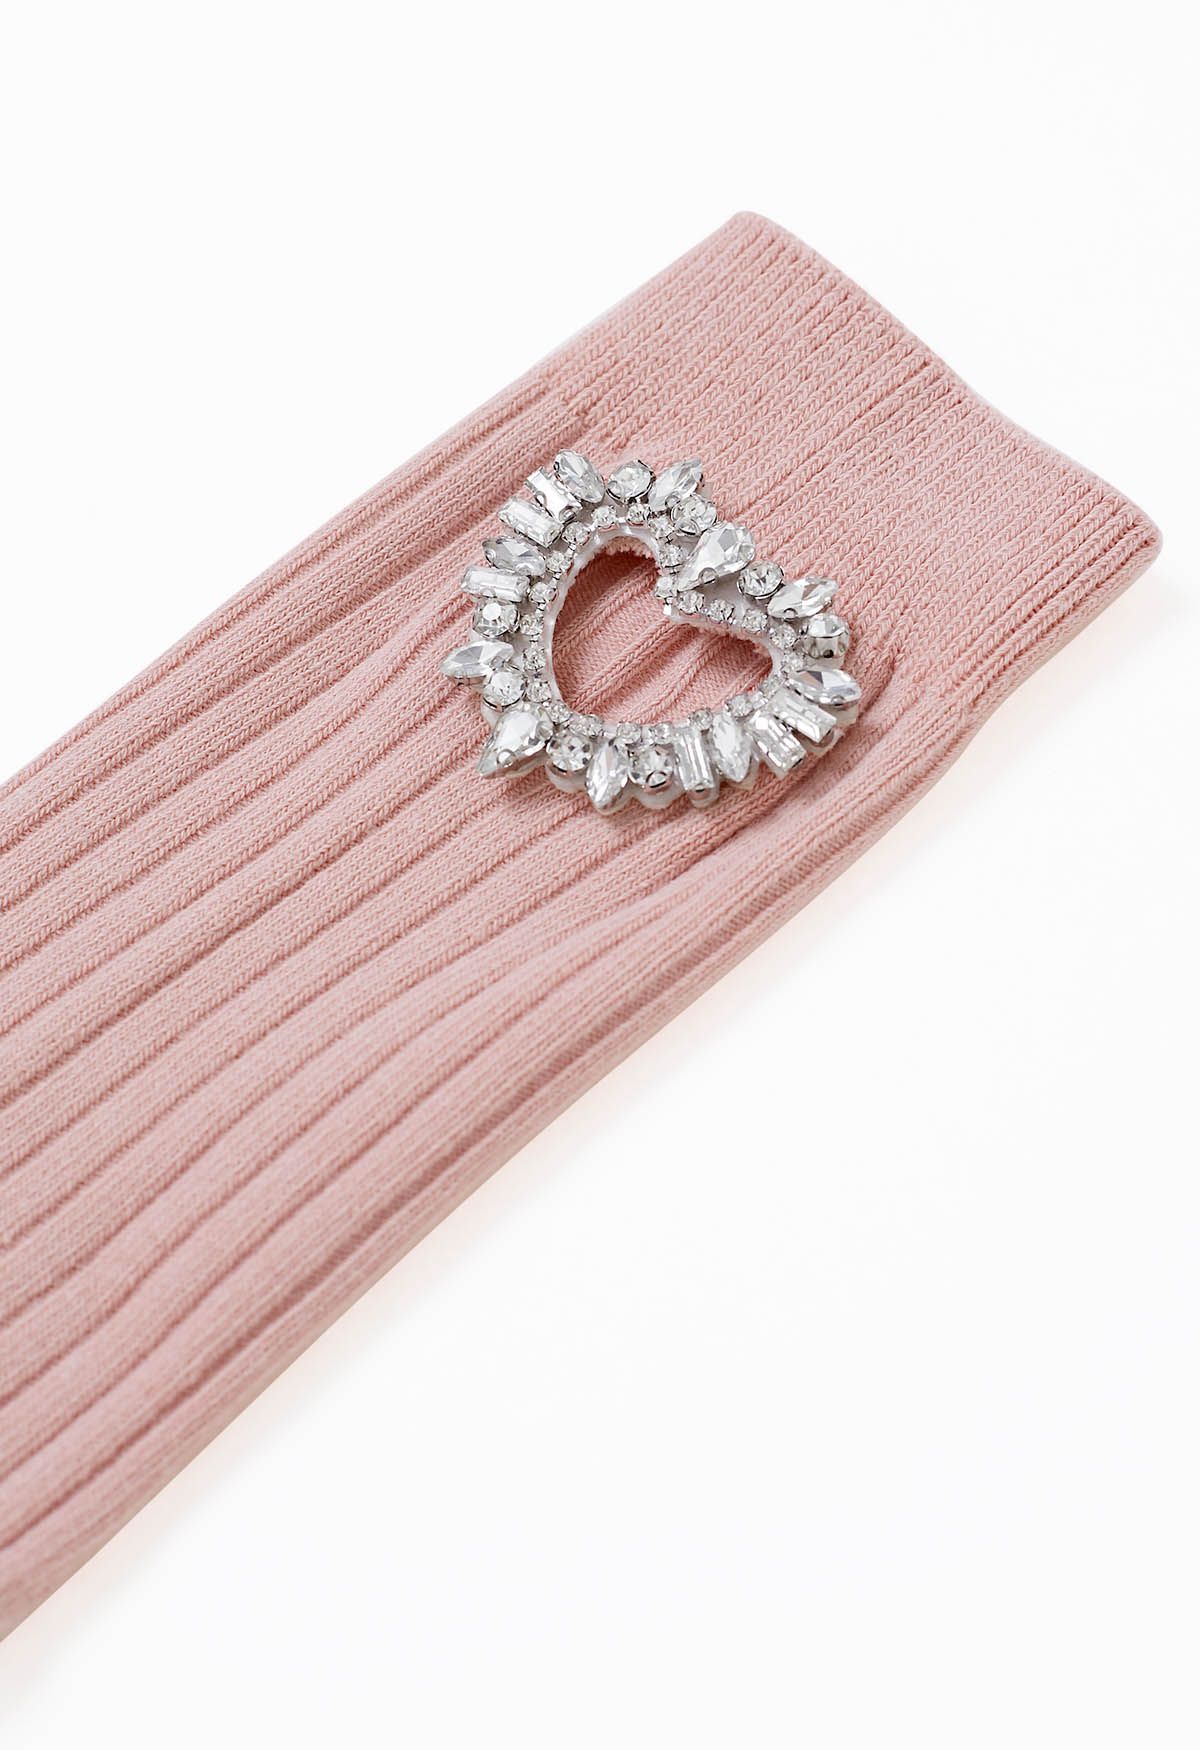 Rhinestone Hollow Out Heart Cotton Socks in Pink